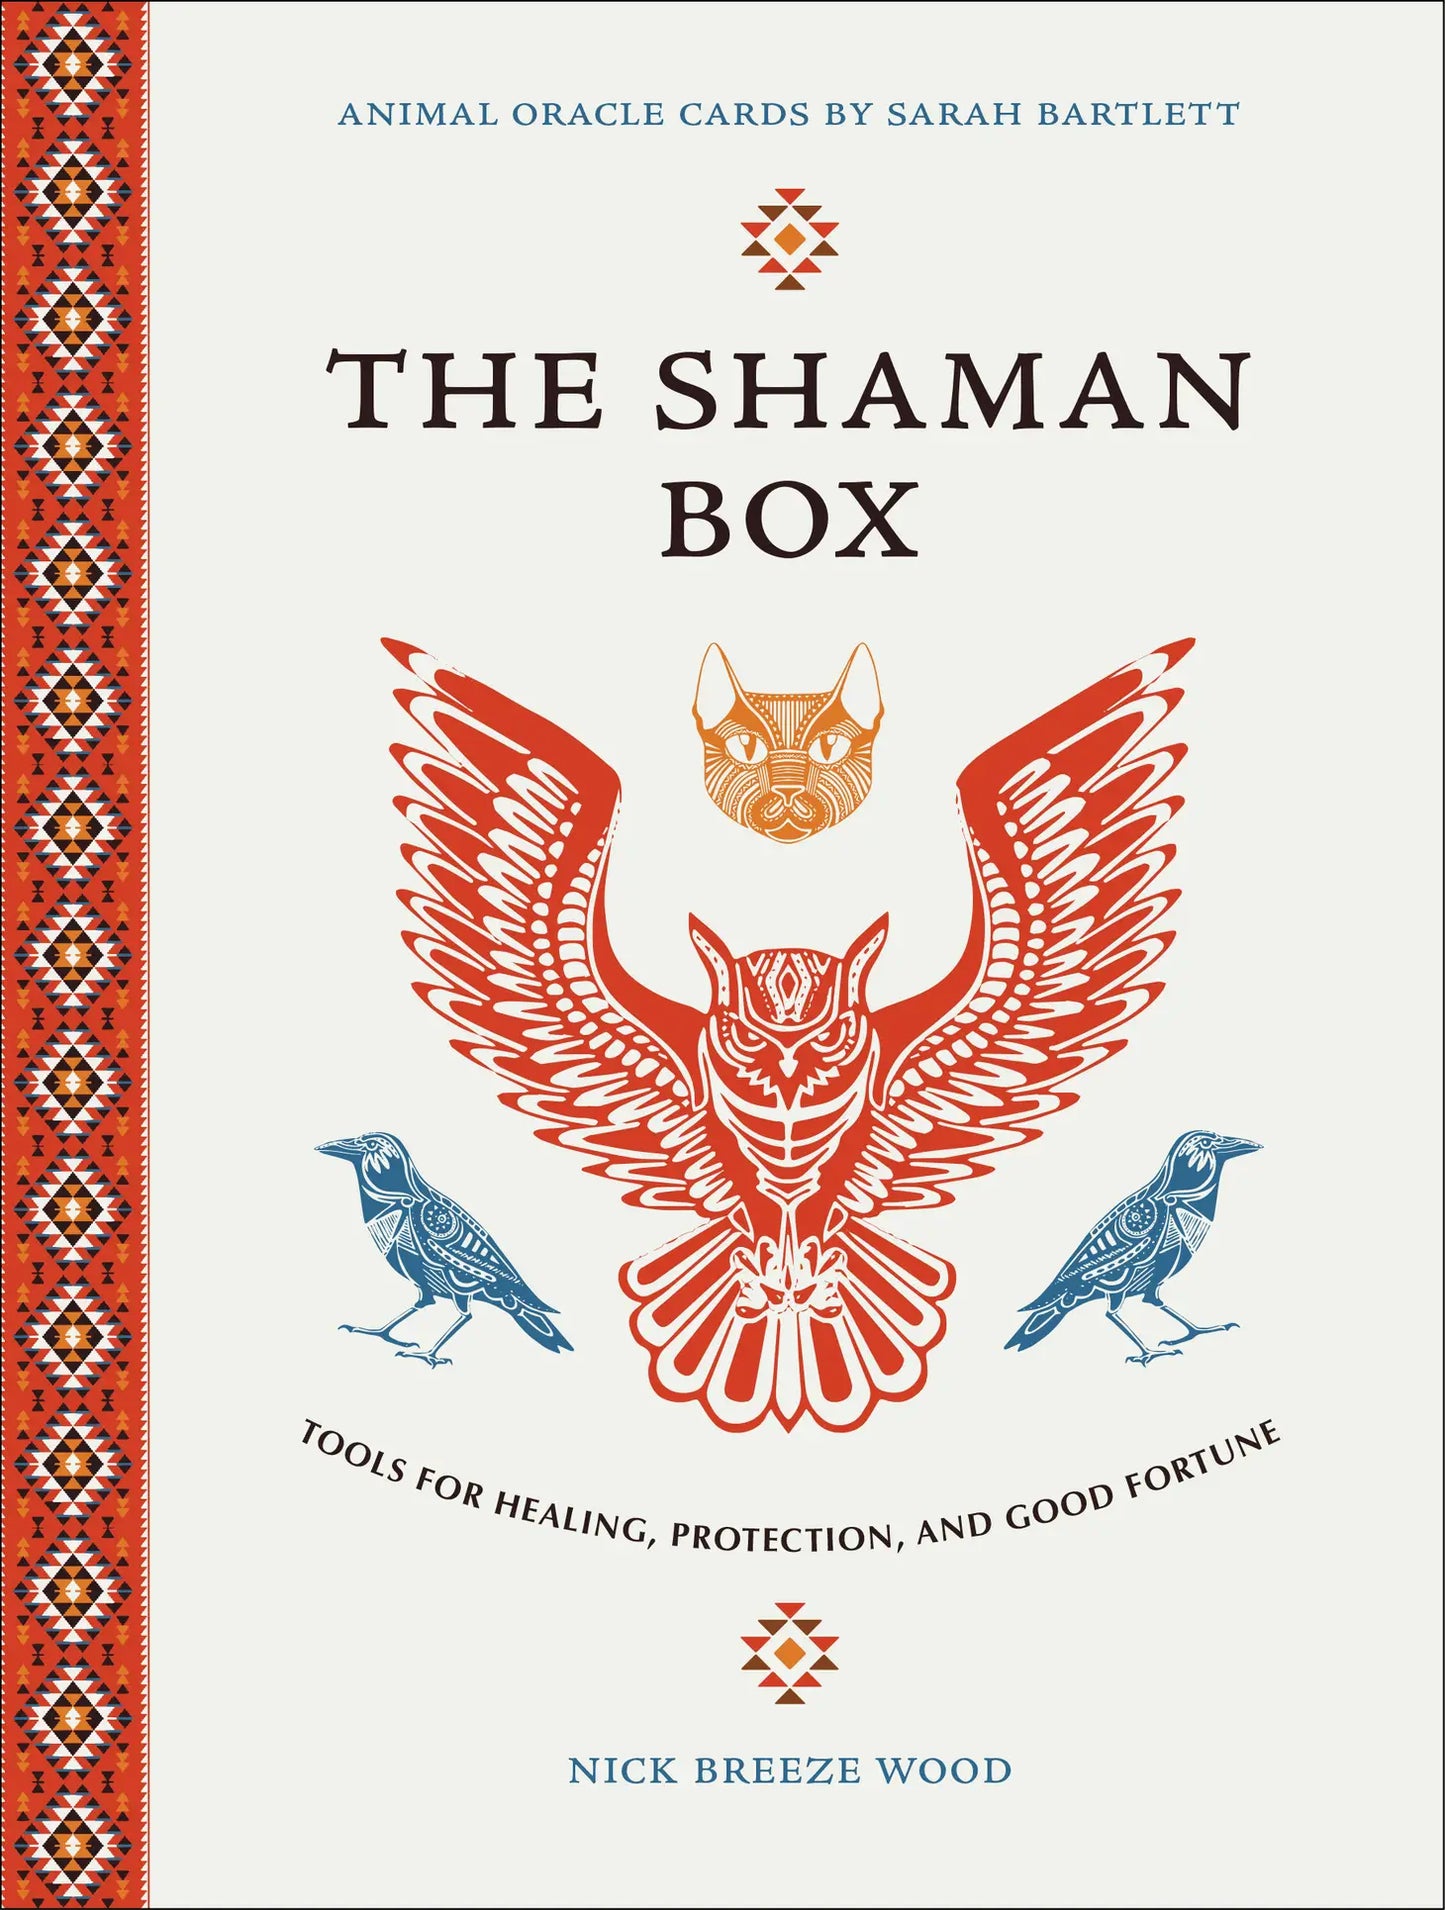 The Shaman Box: An Animal Oracle Deck with 36 Cards & Book